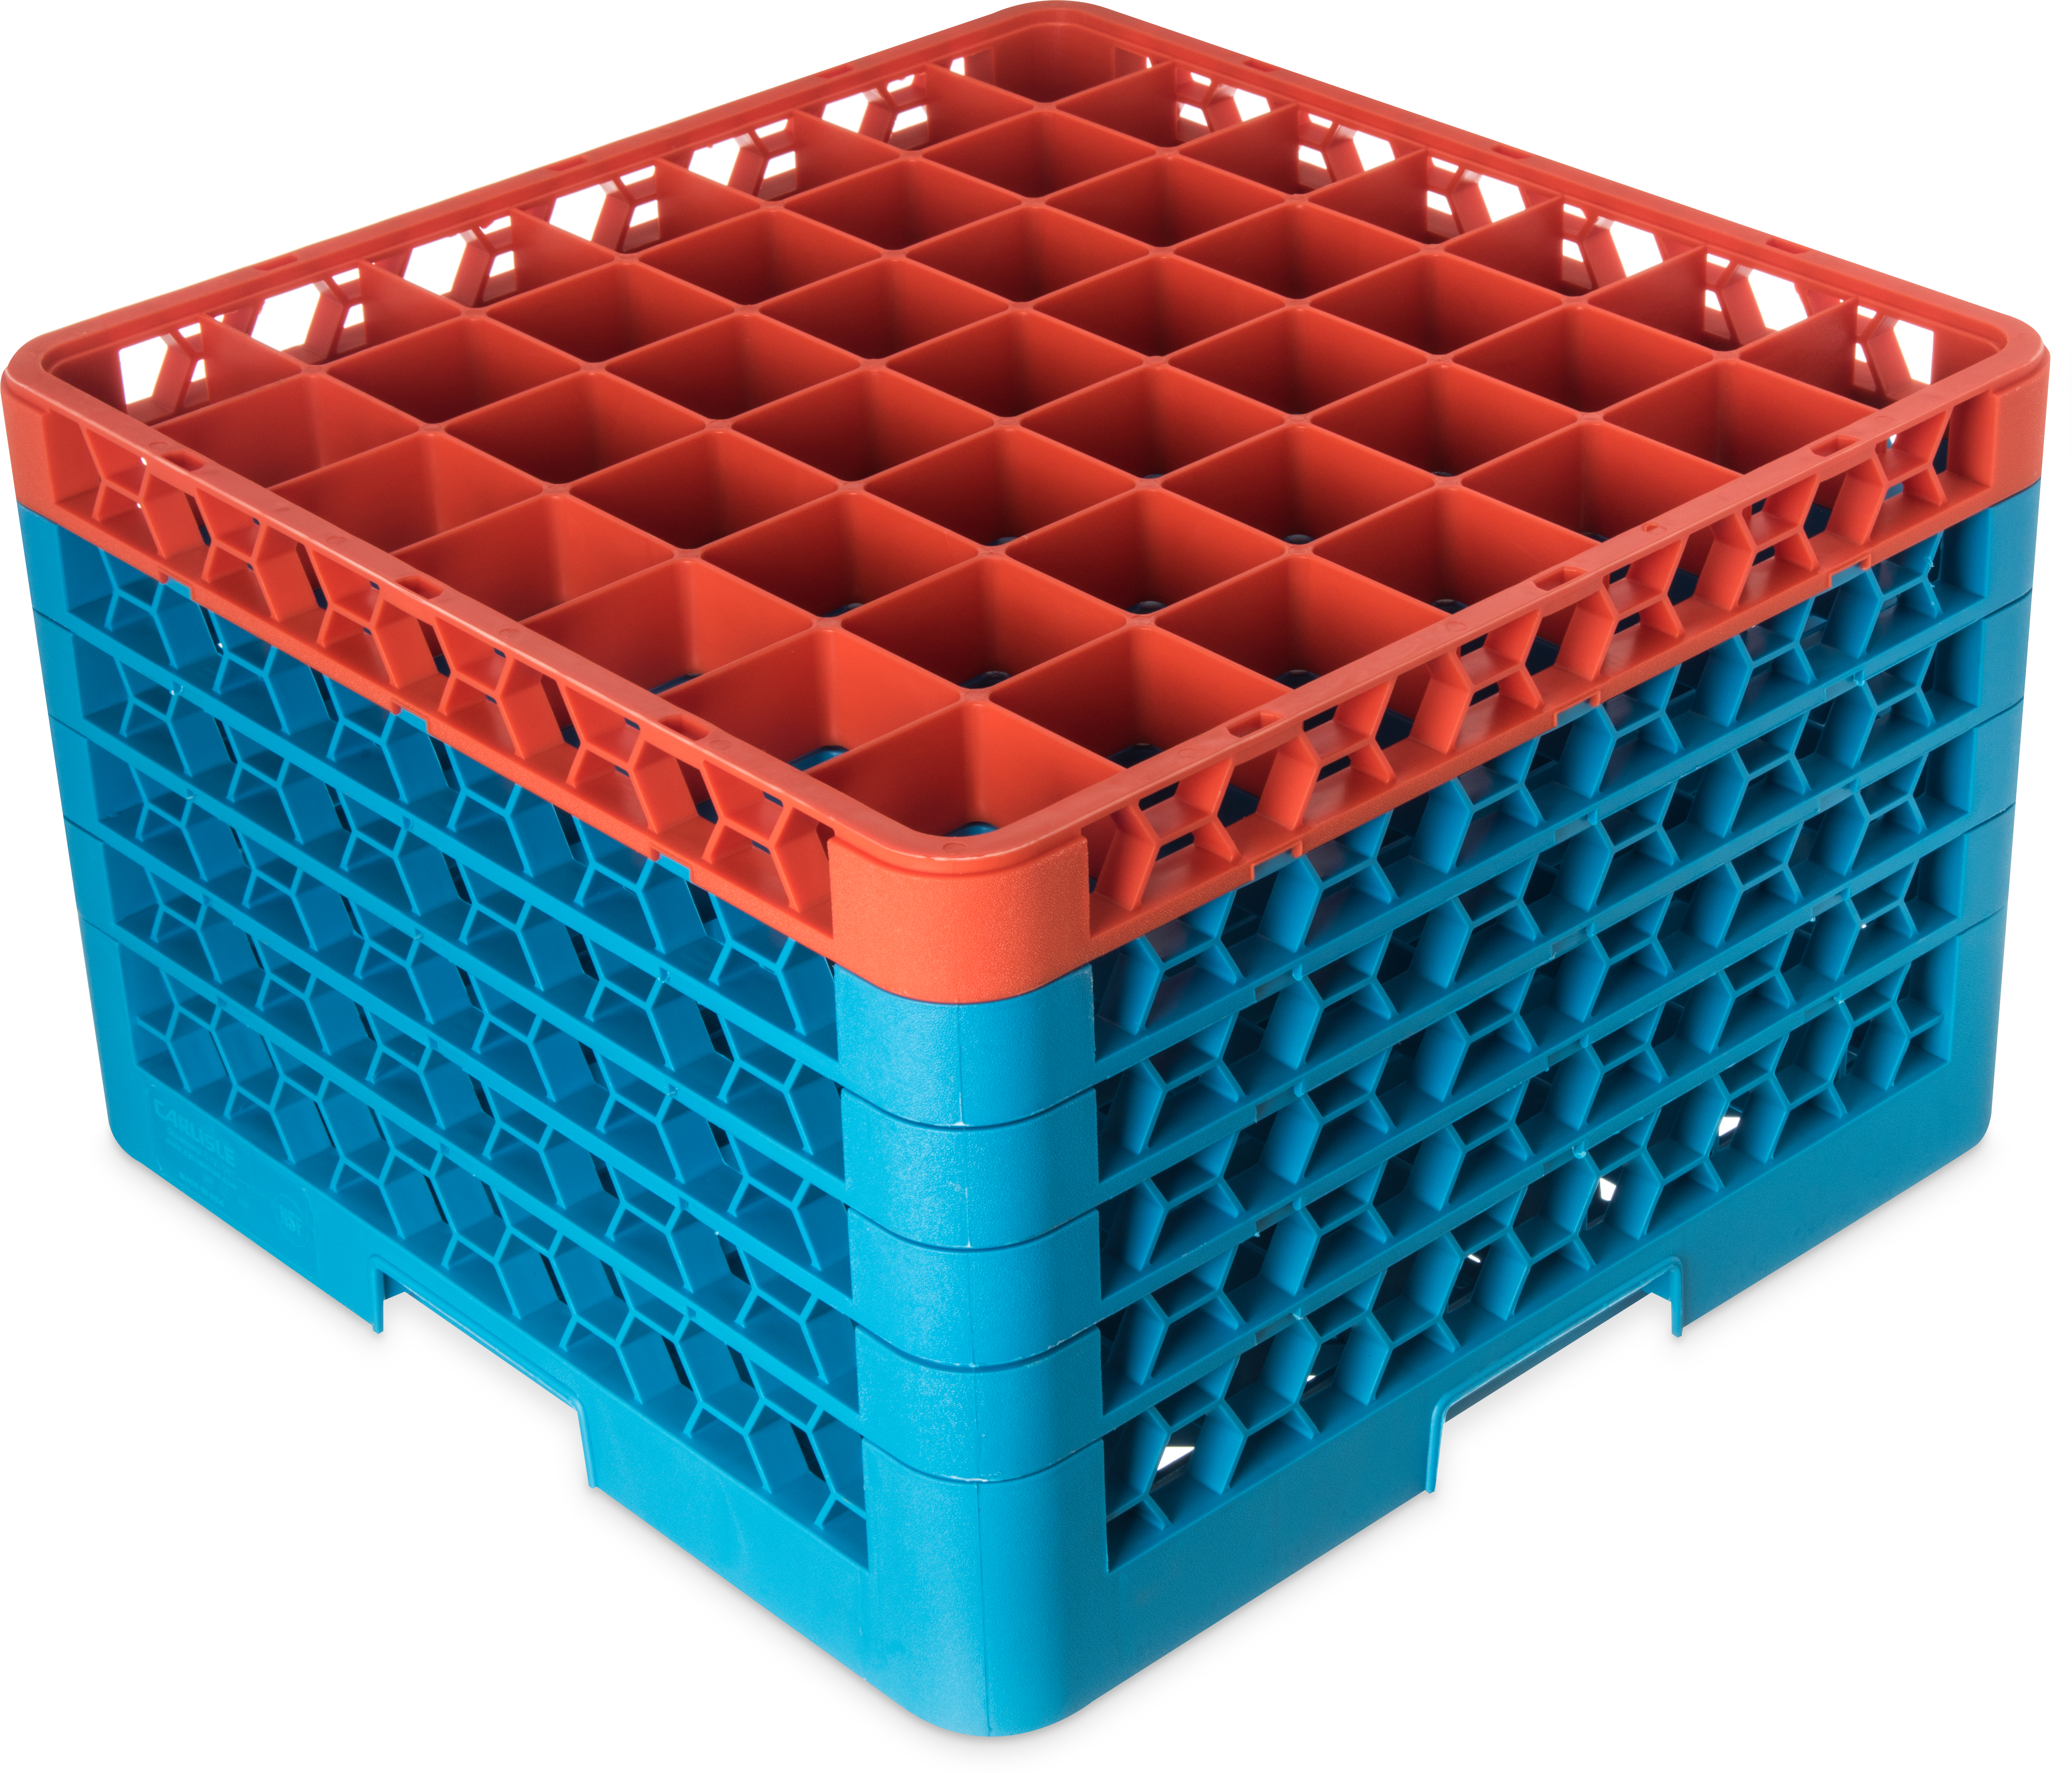 OptiClean 49 Compartment Glass Rack with 5 Extenders 11.9 - Orange-Carlisle Blue